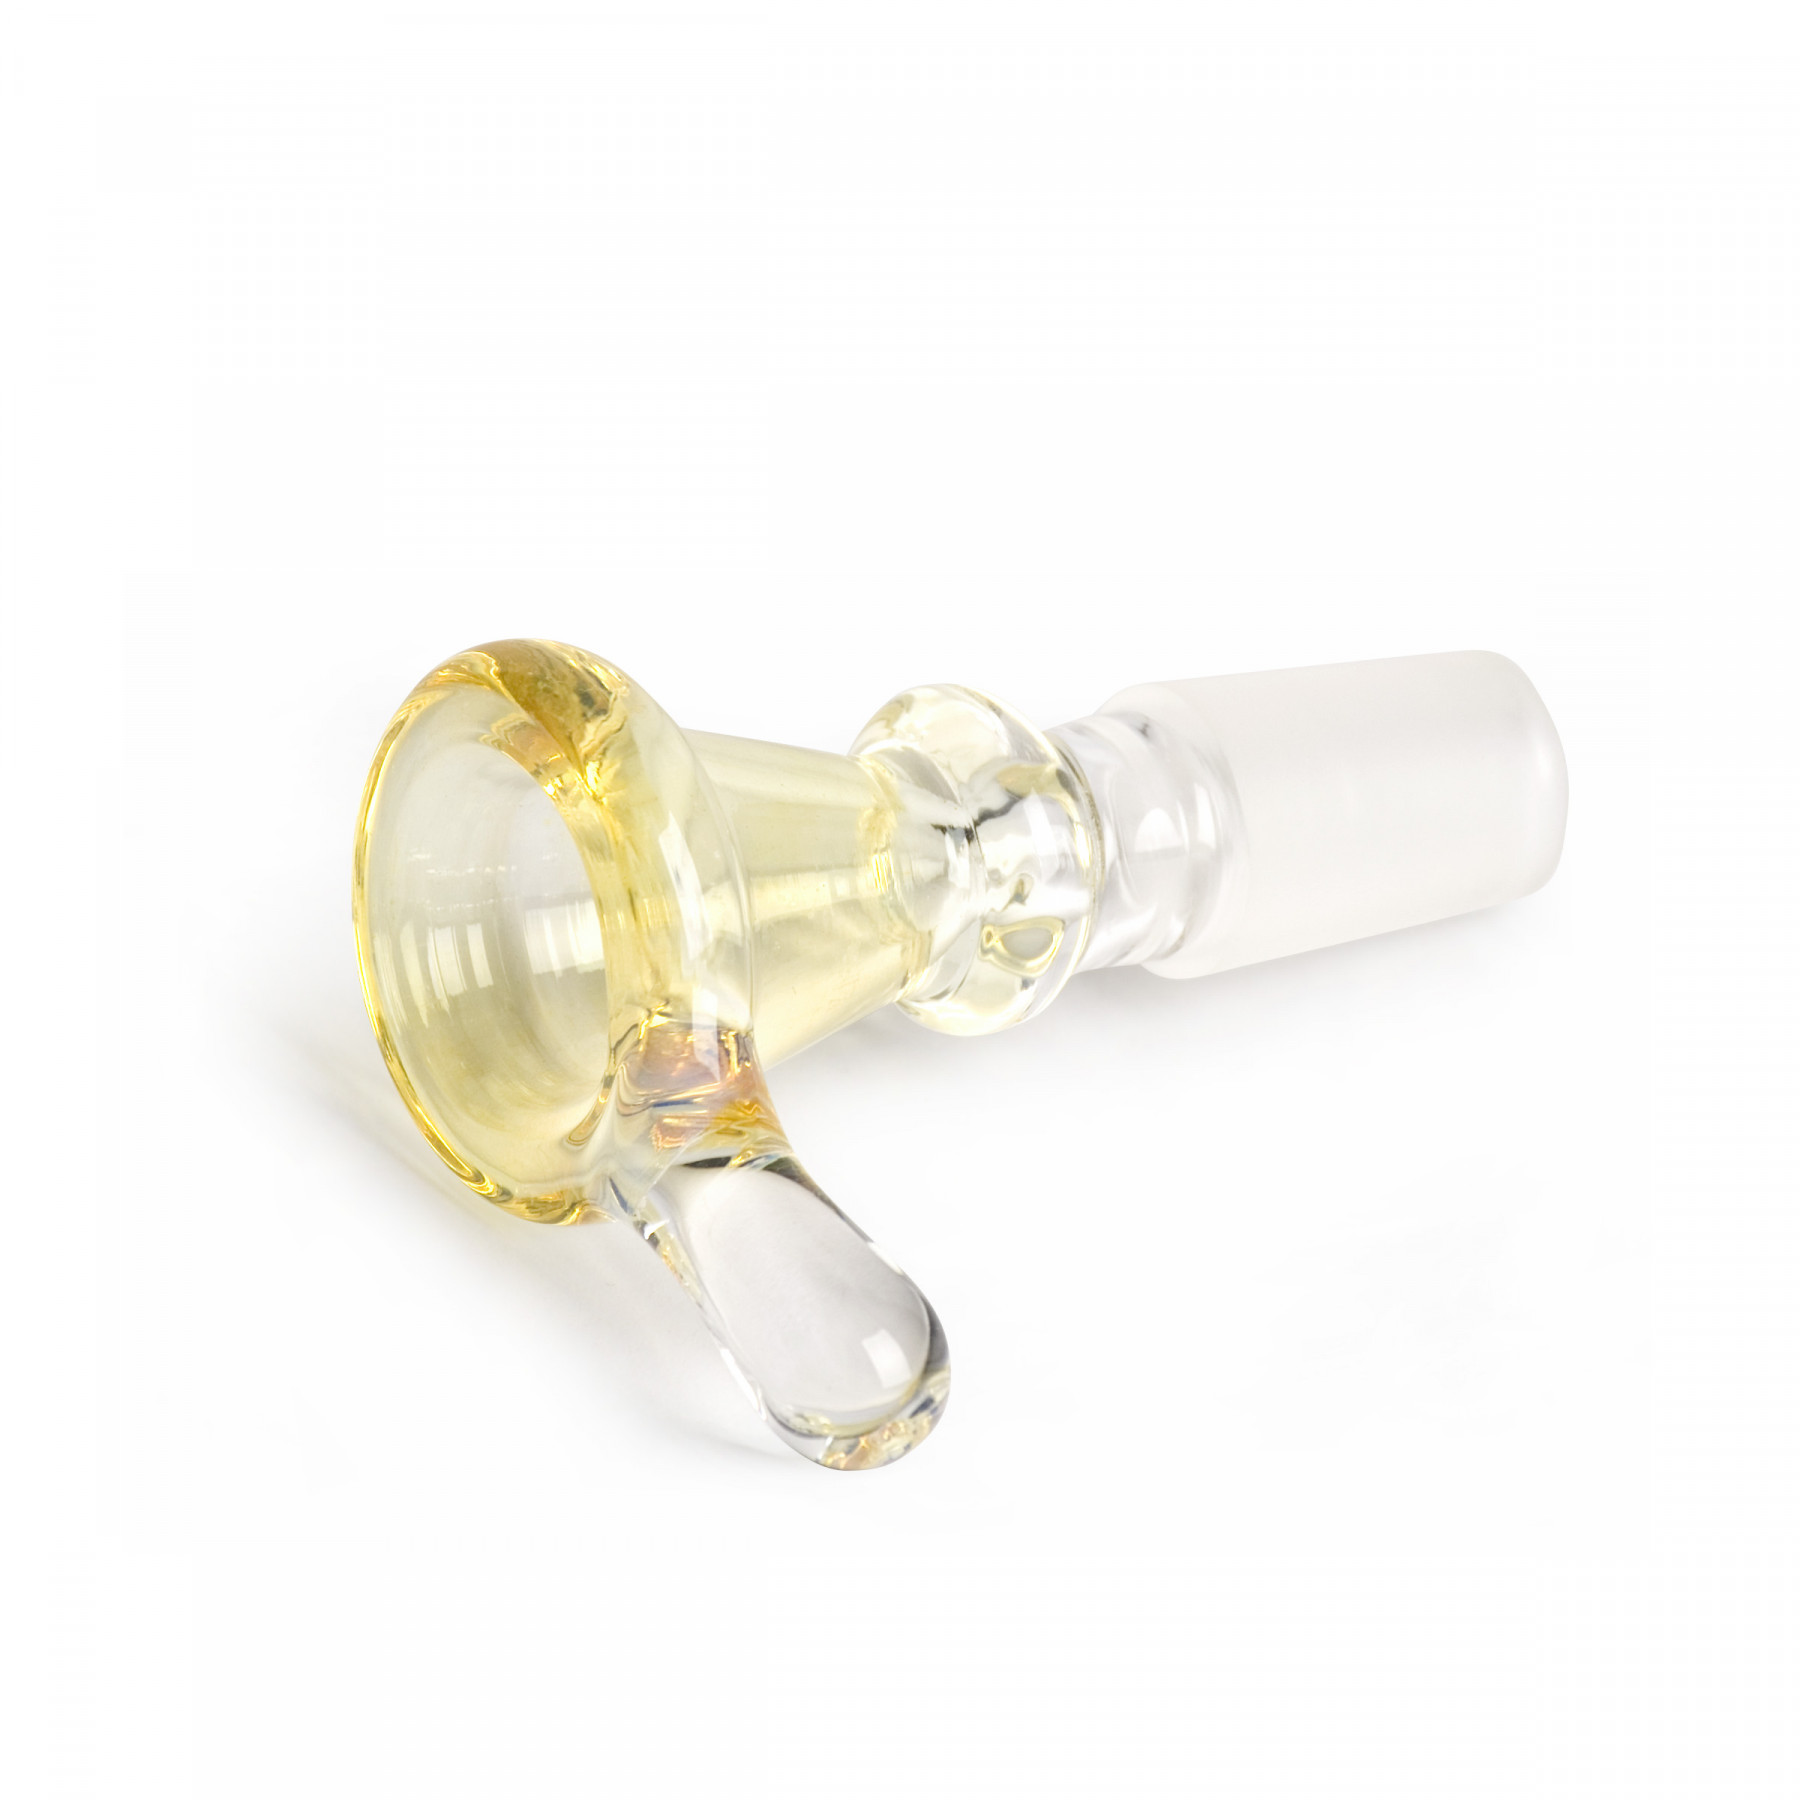 14mm Thumper Cone Pull-Out